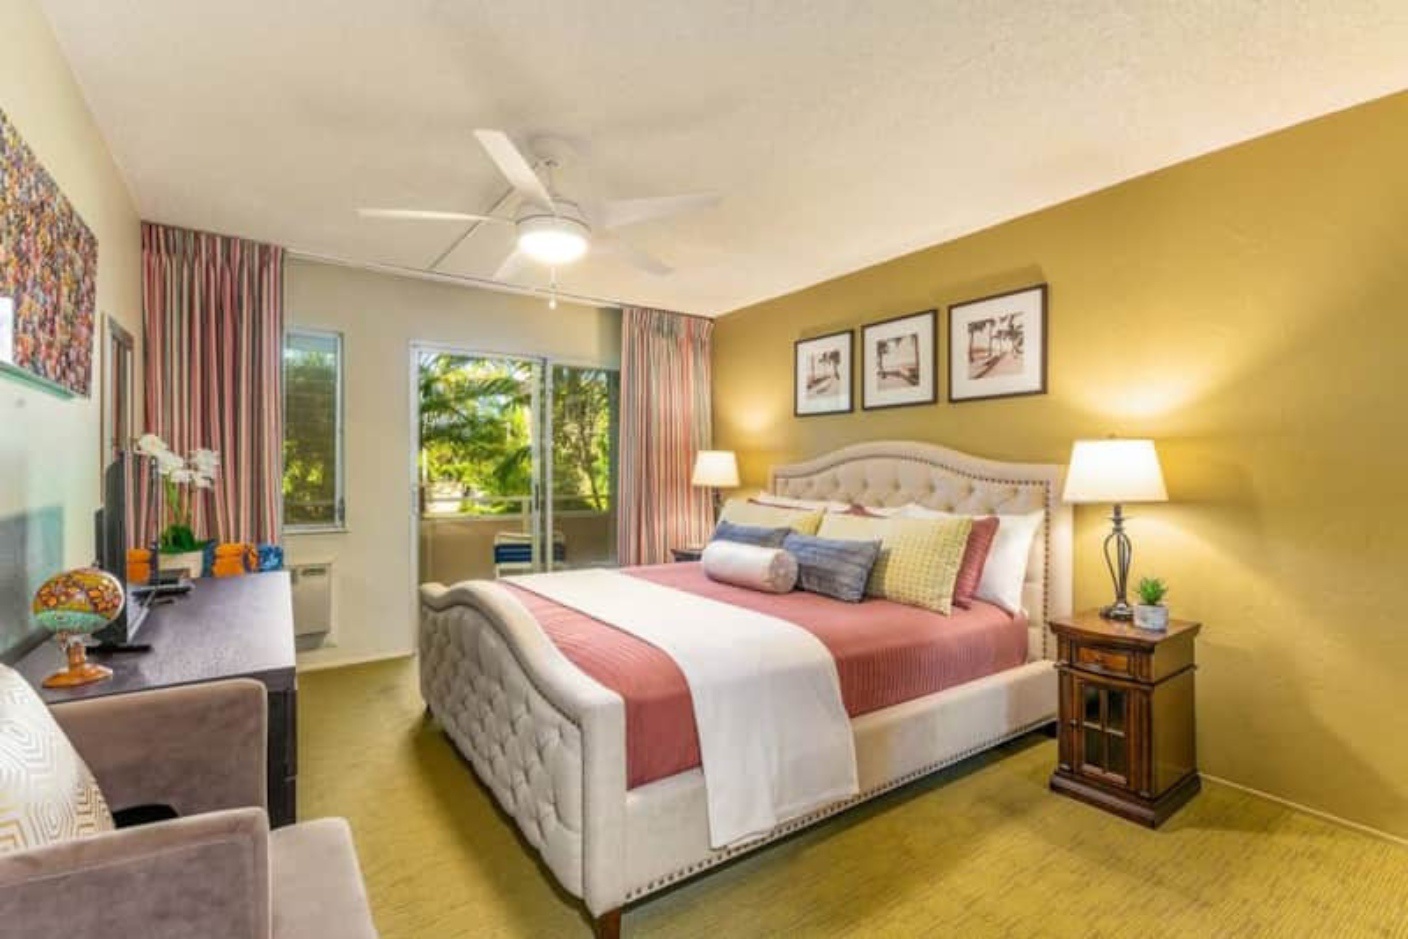 Kapaa Vacation Rentals, Kahaki Hale - A king bed awaits in the primary guest suite with access to a private lanai